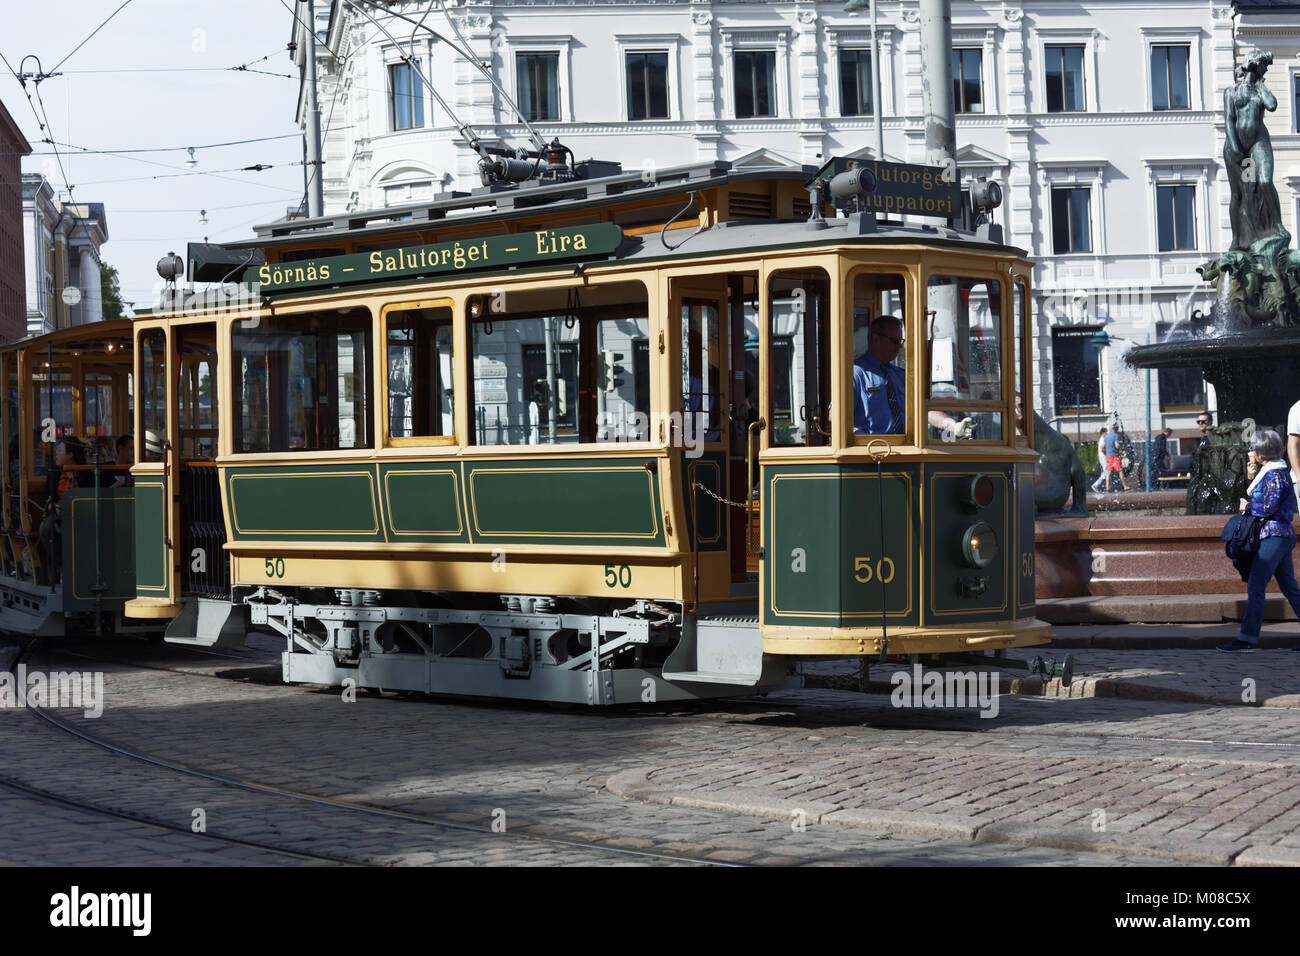 Helsinki, Finland - July 29, 2017: Retro tram on Kauppatori, Market Square in a summer day. The car made in 1909 is now used as sightseeing tram route Stock Photo